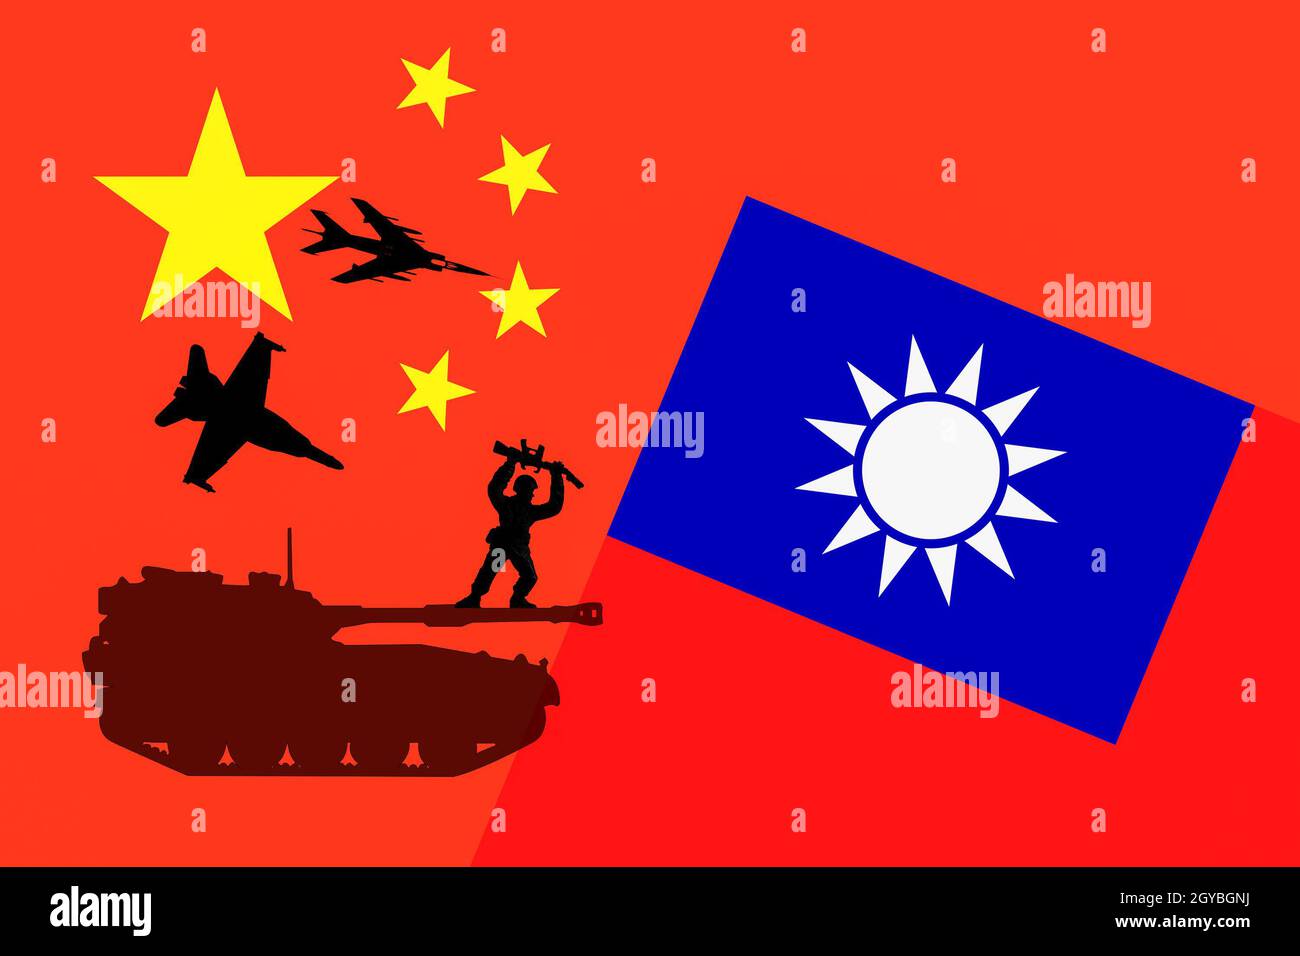 Flags of China and Taiwan. Concept image depicting the tension between the countries and the threat of China invading. Stock Photo